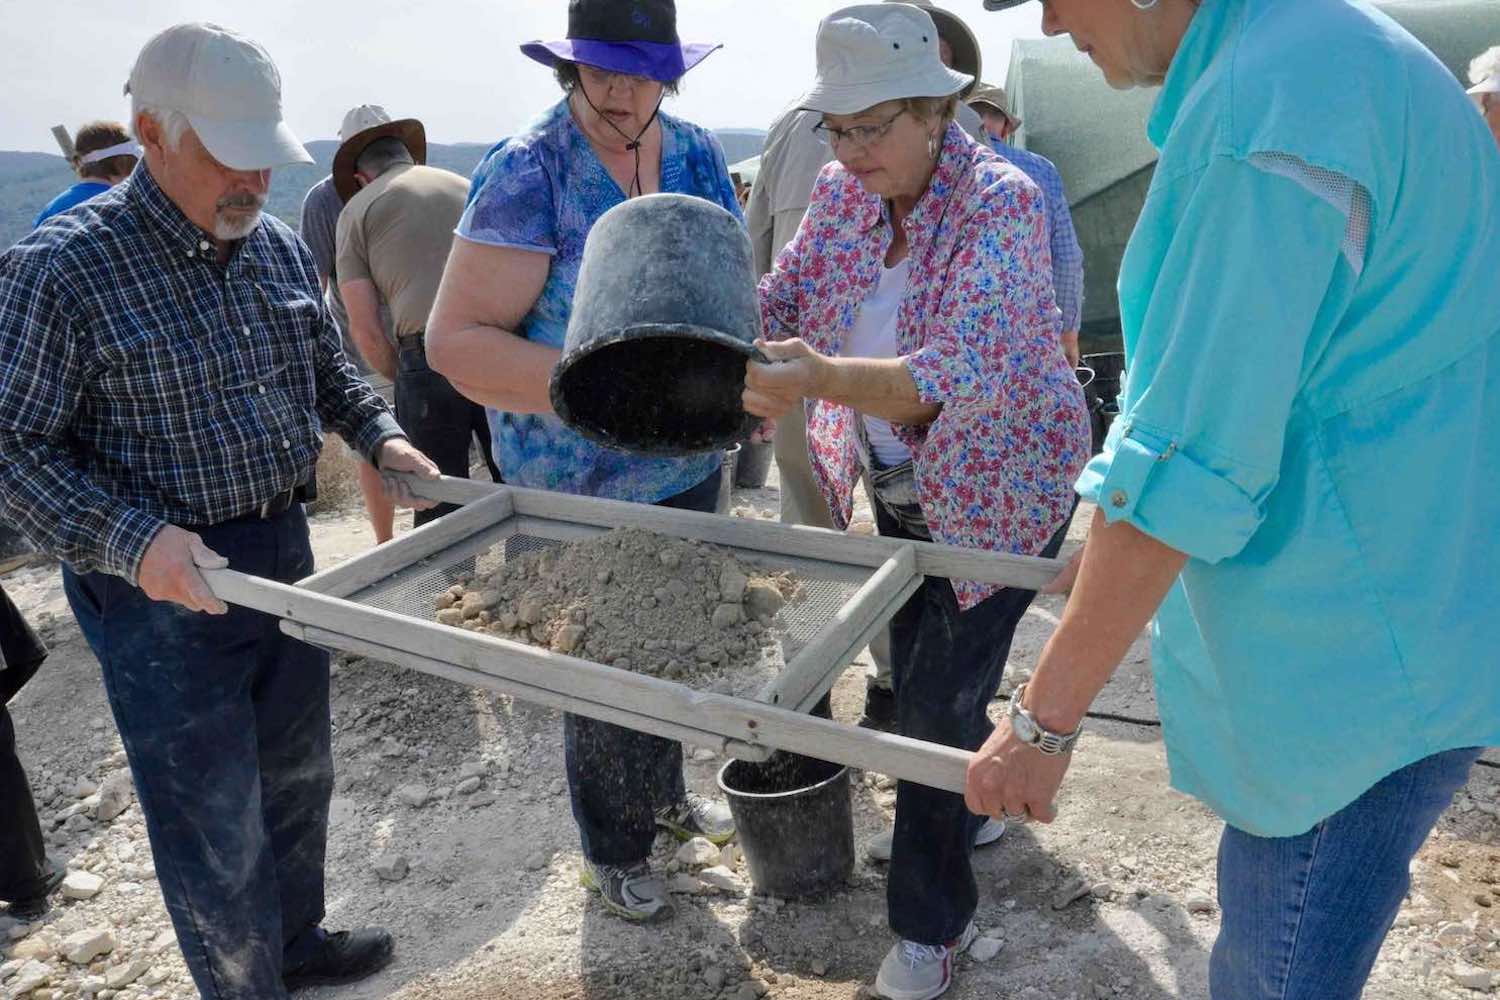 People sifting soil on an archaelogical dig